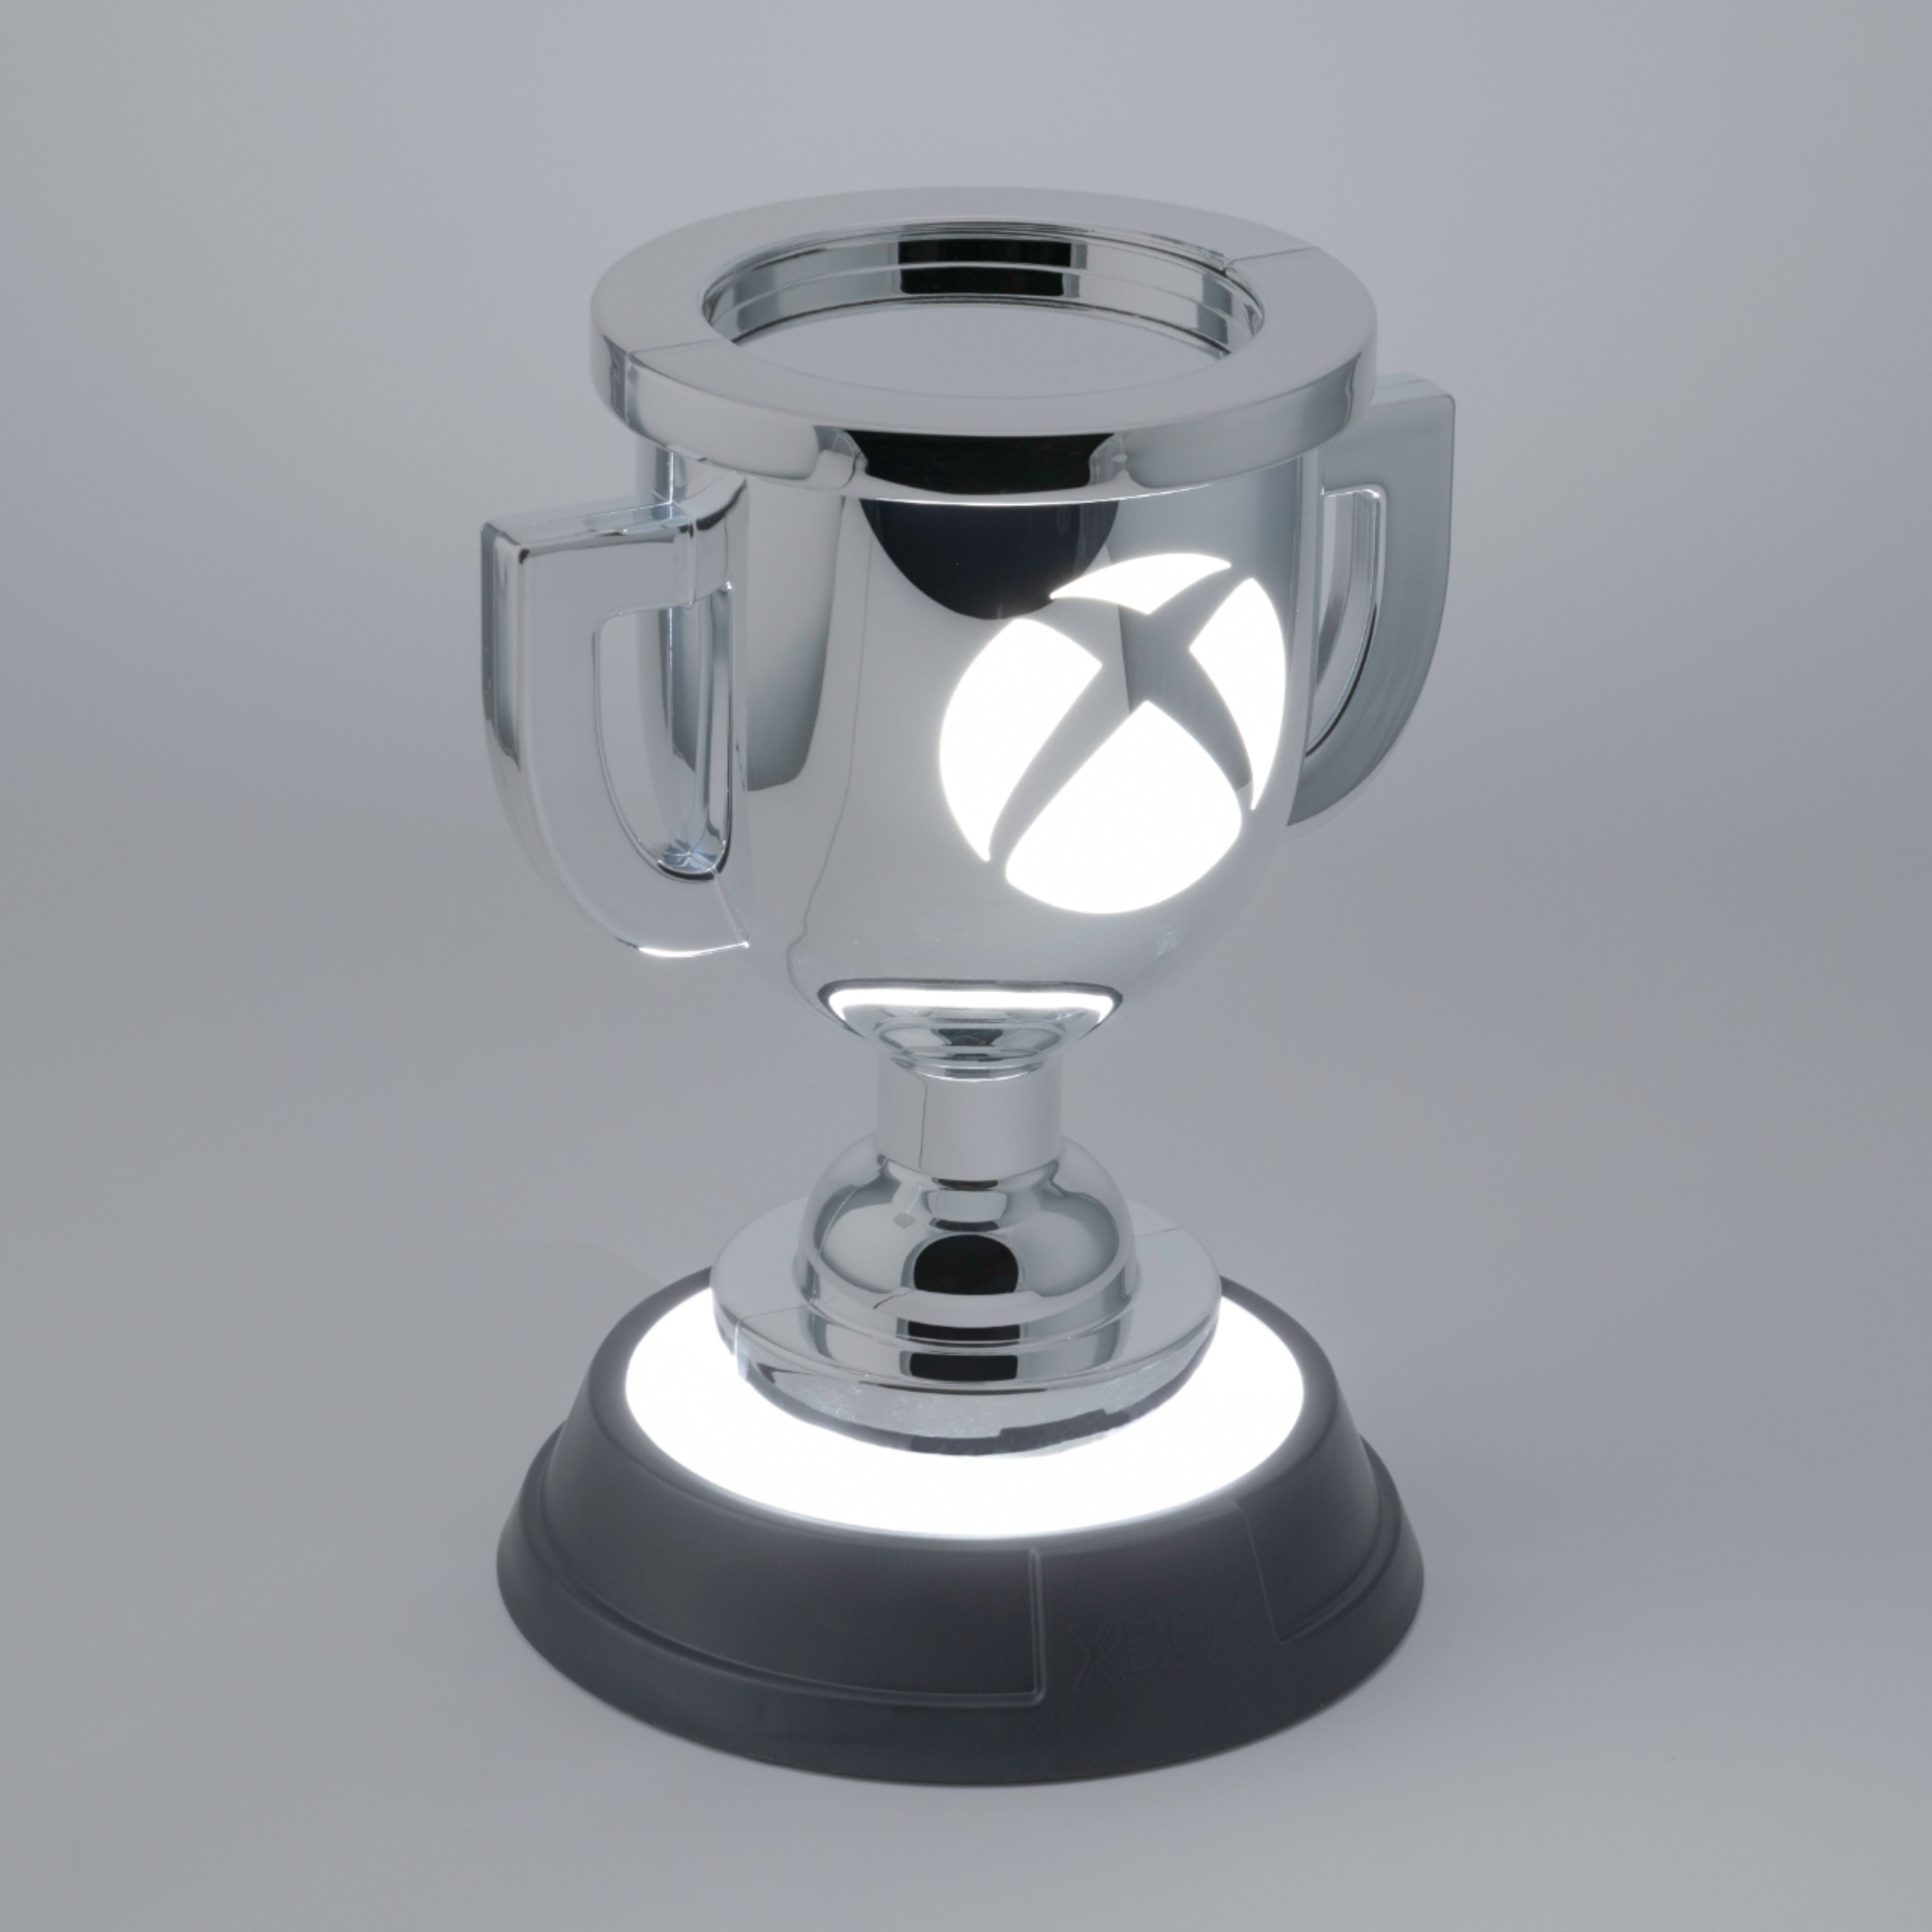 Paladone - Xbox Trophy Premium 8-inch Collectible Light